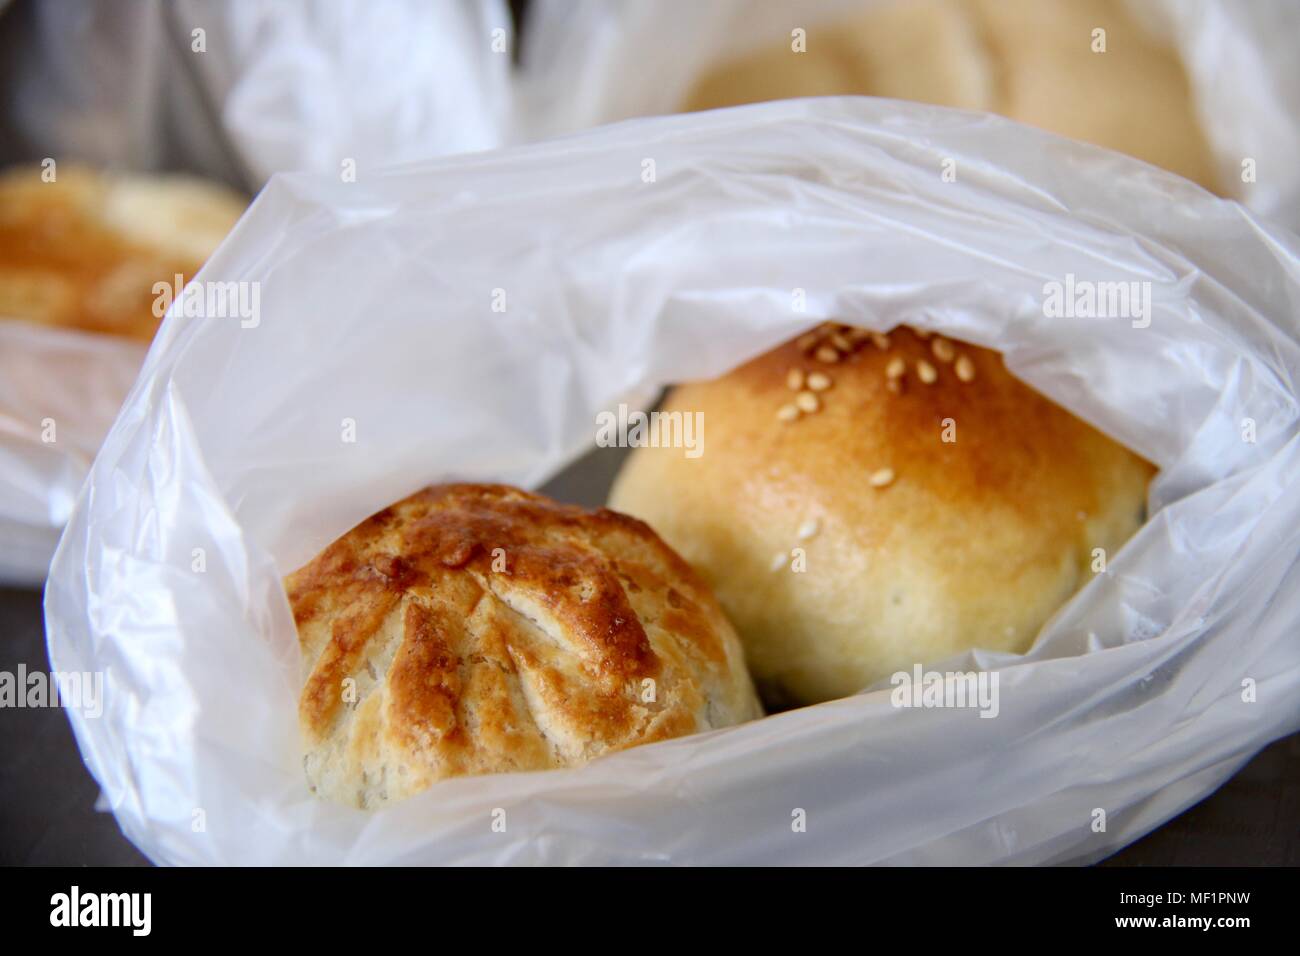 Chinese Baked Pastry with Barbecue Meat Stuffing Stock Photo